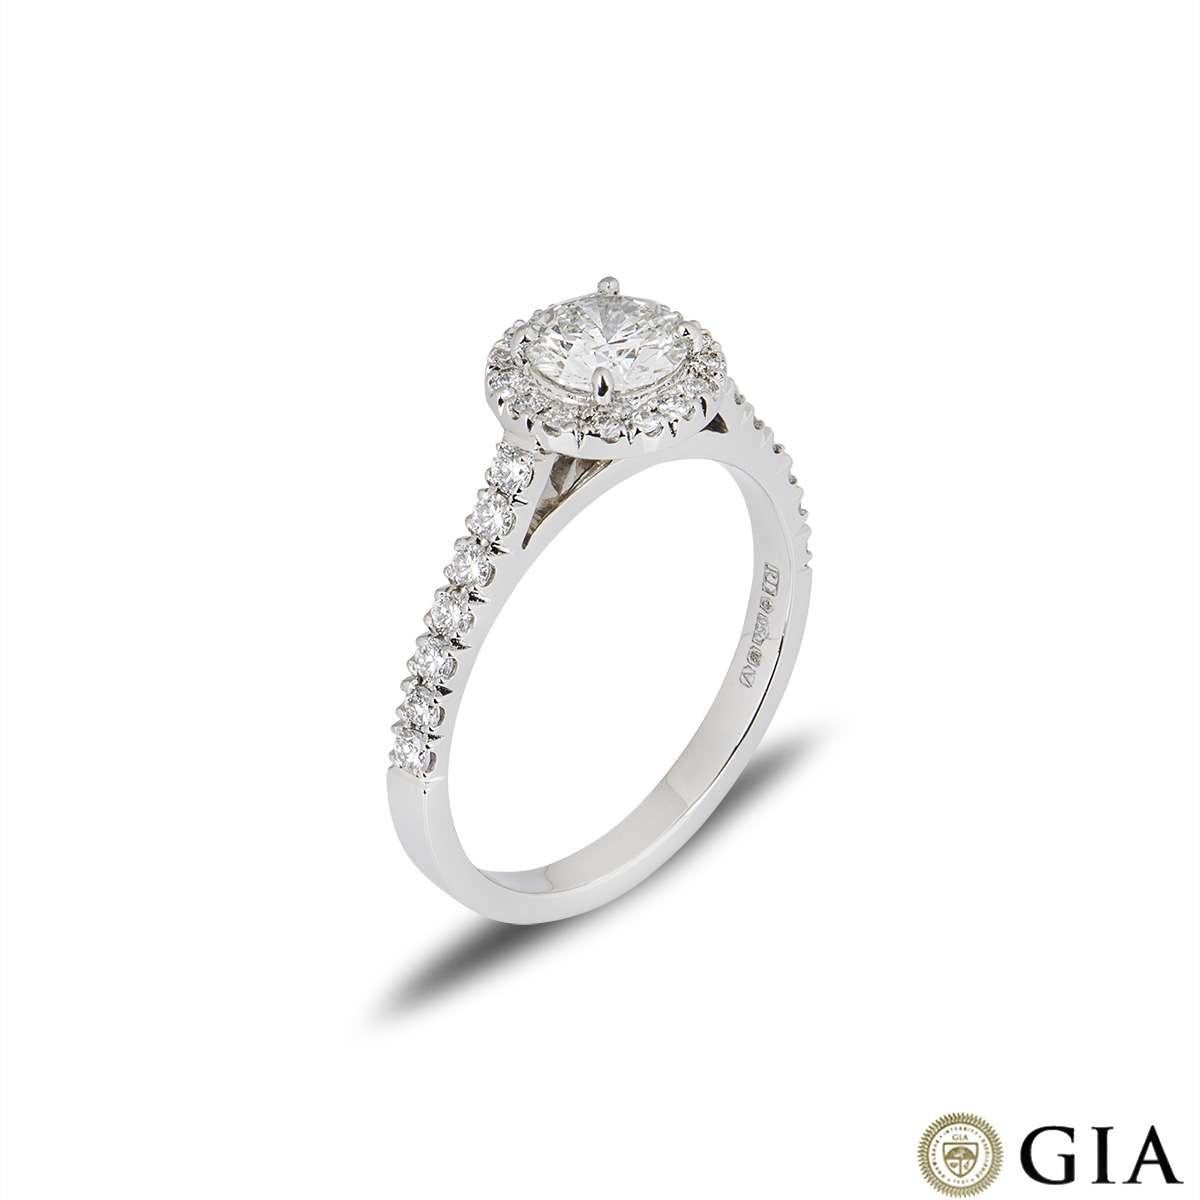 A beautiful diamond ring in platinum. The ring is set with a natural very light green round brilliant cut diamond, which is SI1 in clarity. The ring has diamond set shoulders and a diamond halo totalling approximately 0.40 carat. The ring is